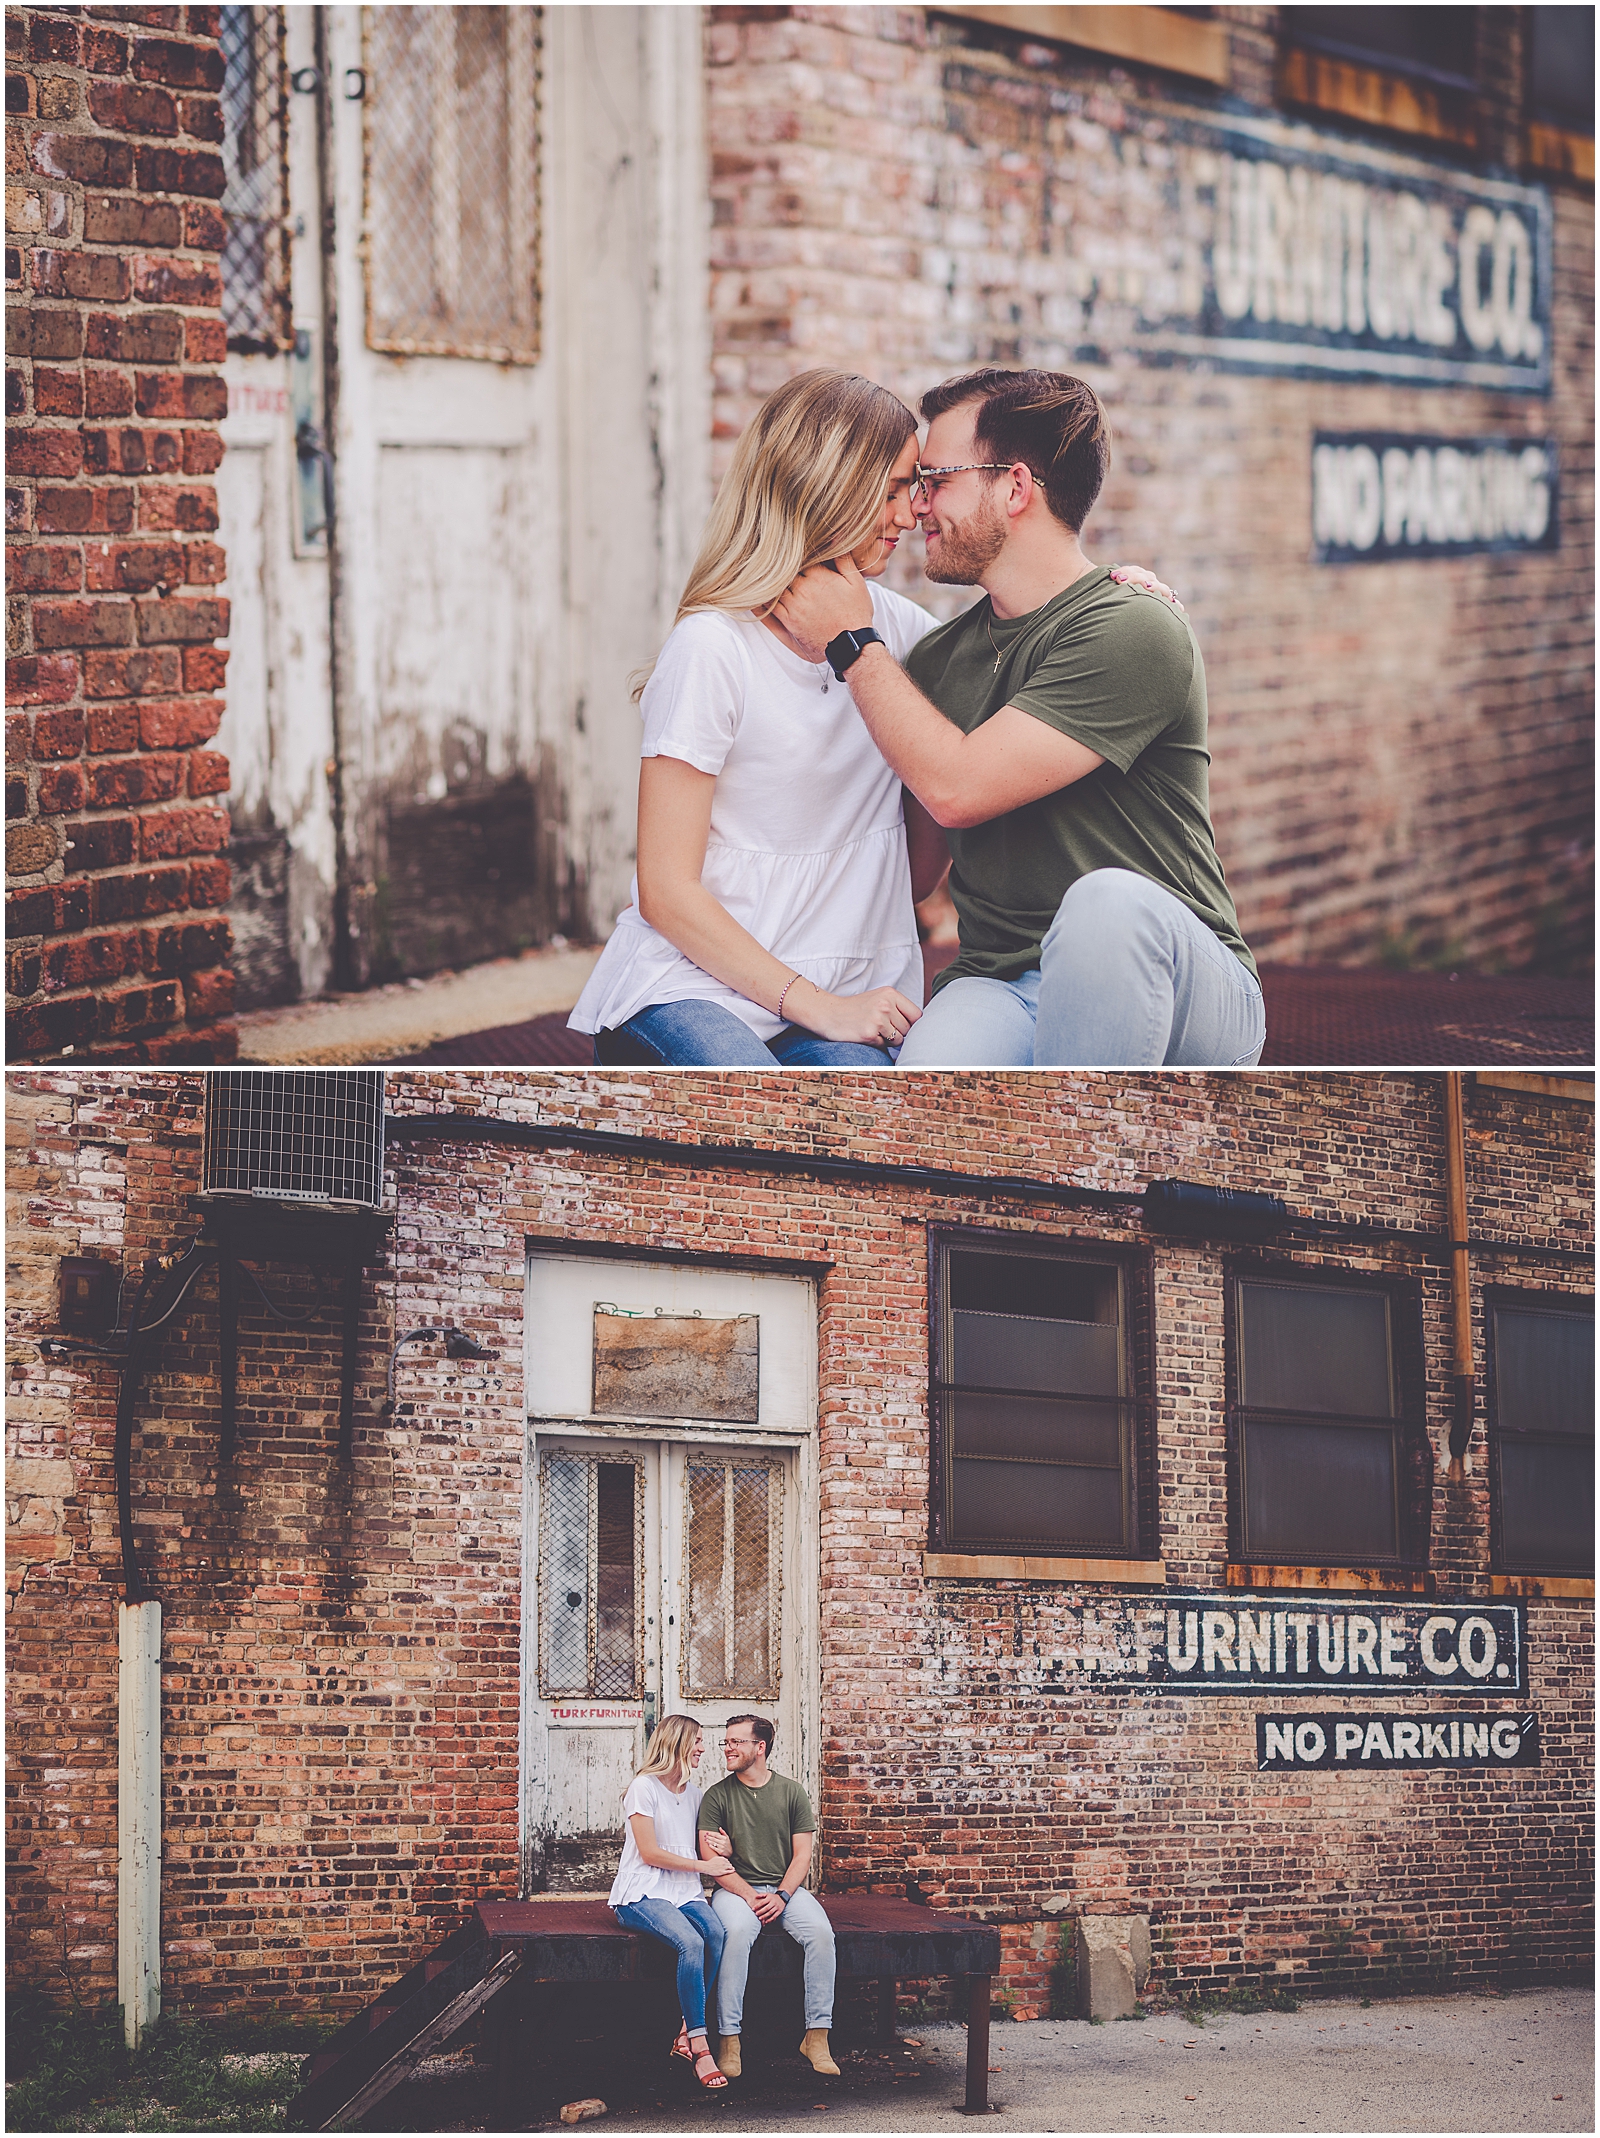 Lauren and Chase's Downtown Kankakee engagement photos in Kankakee, Illinois with Chicagoland wedding photographer Kara Evans Photographer.